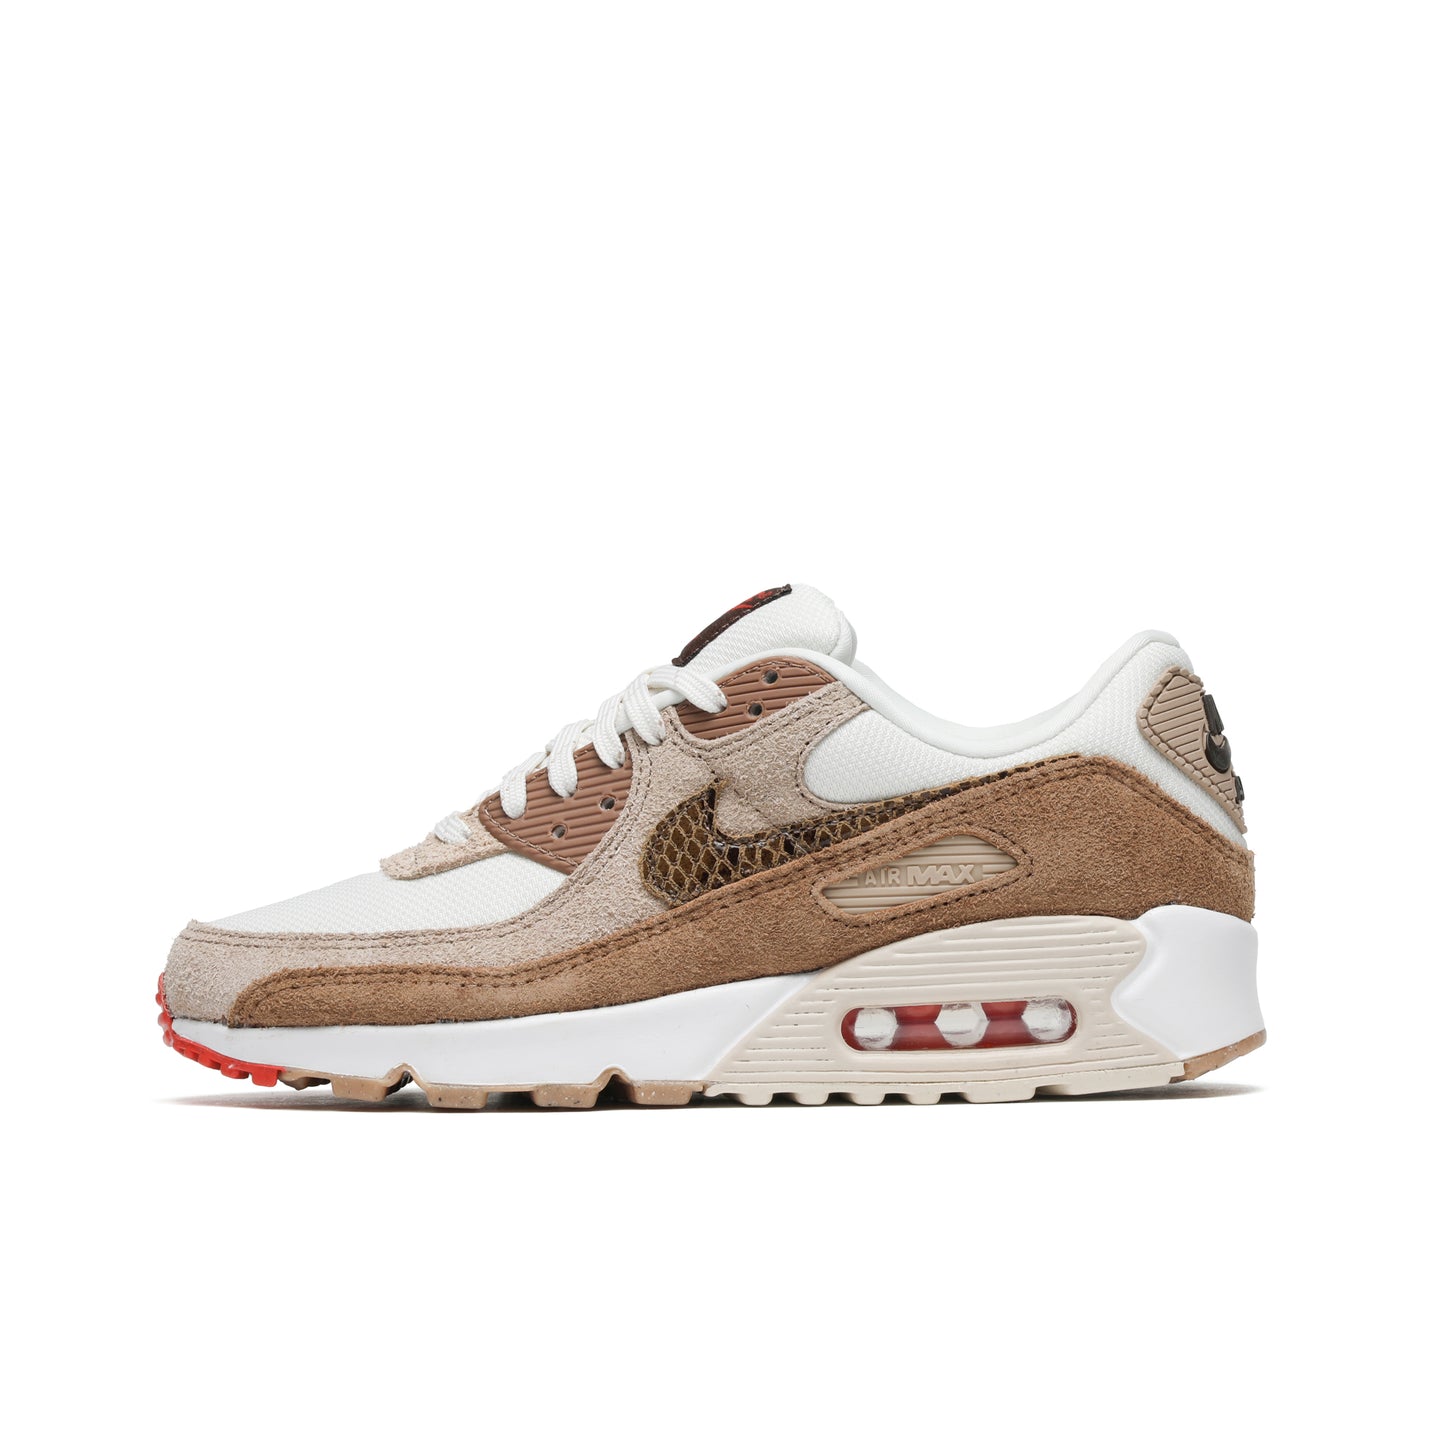 DX9502-100] Women's Nike Air Max Ivory, Picante Red, Summit White) – The Darkside Initiative